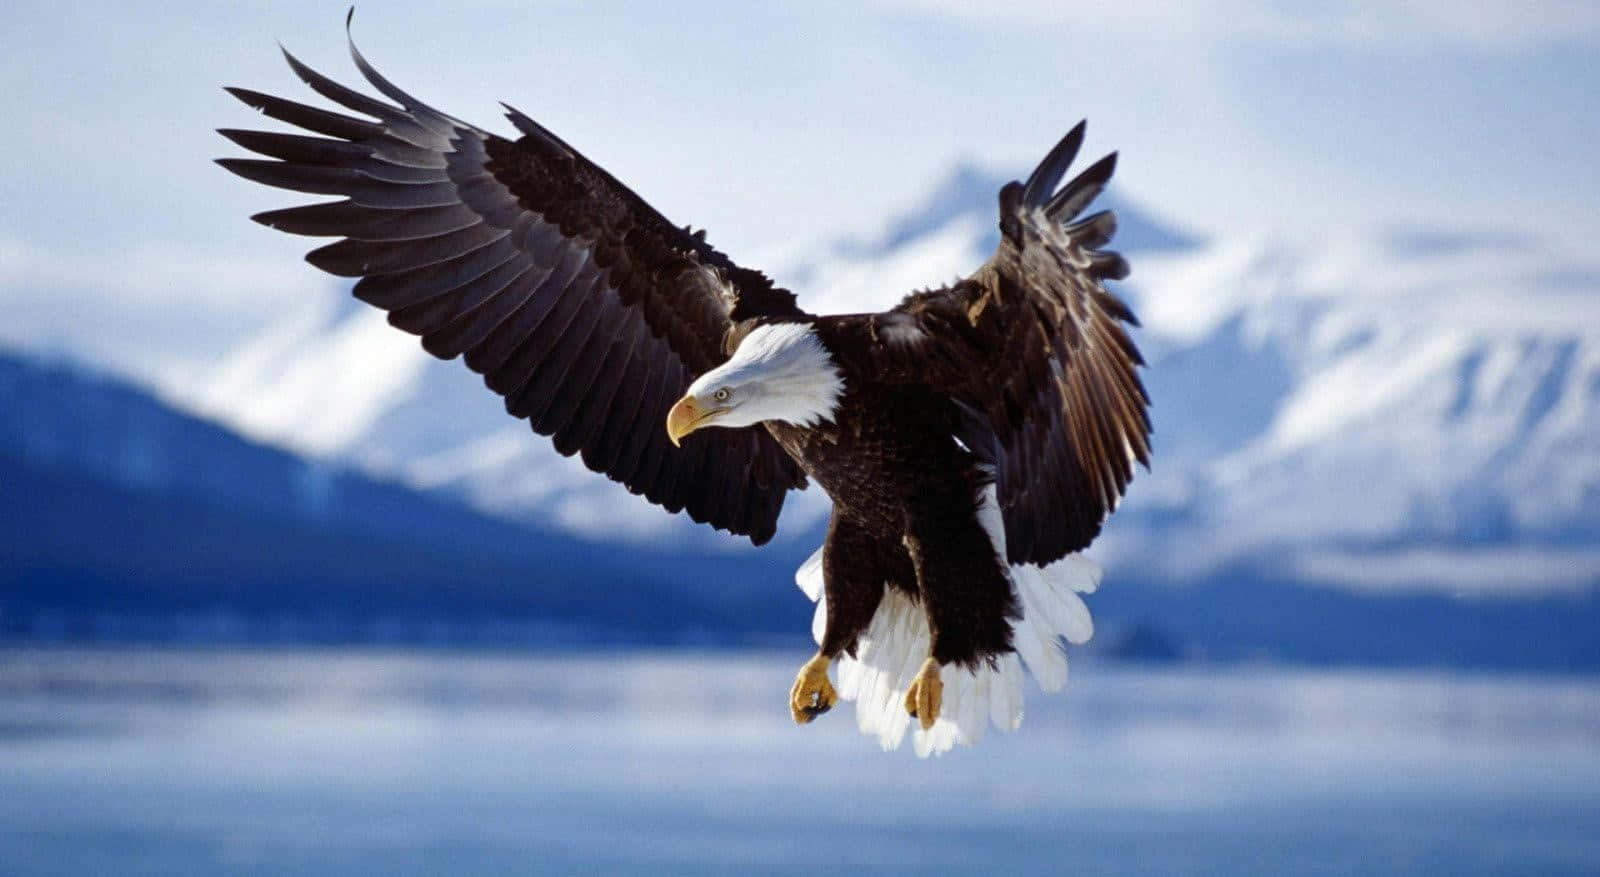 A Bald Eagle Flies Over A Lake With Mountains In The Background